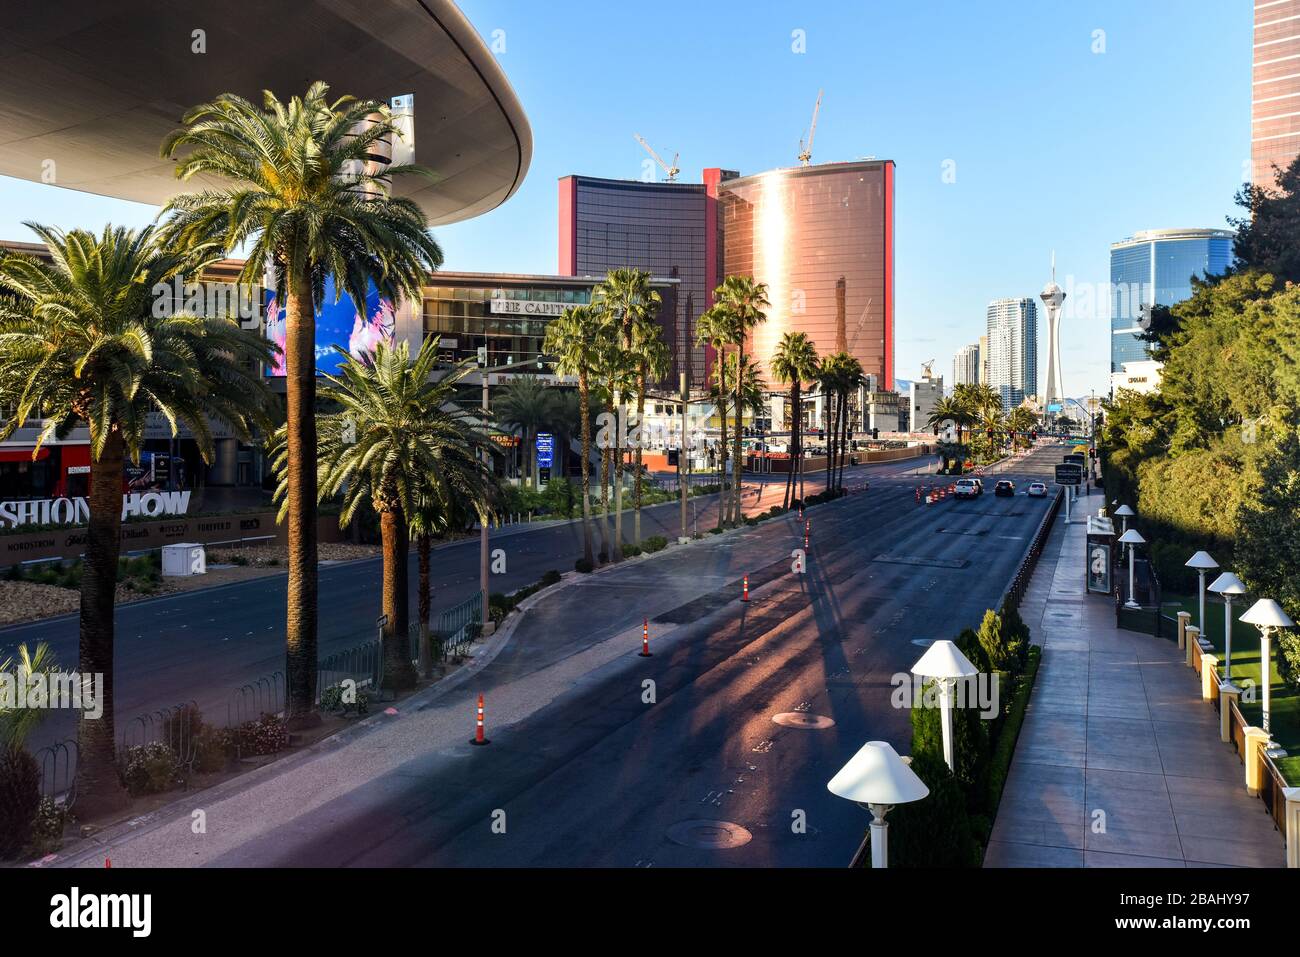 One week into the Las Vegas shut down due to Coronavirus, the Strip is fairly empty. Most residents seem to be heeding Governor Sisolak’s request you “Stay home for Nevada” with evidence of throughout Clark County, NV. The Empty Streets of Las Vegas Near the Fashion Show Mall on Las Vegas Blvd. Photo Credit: Ken Howard/Alamy Stock Photo